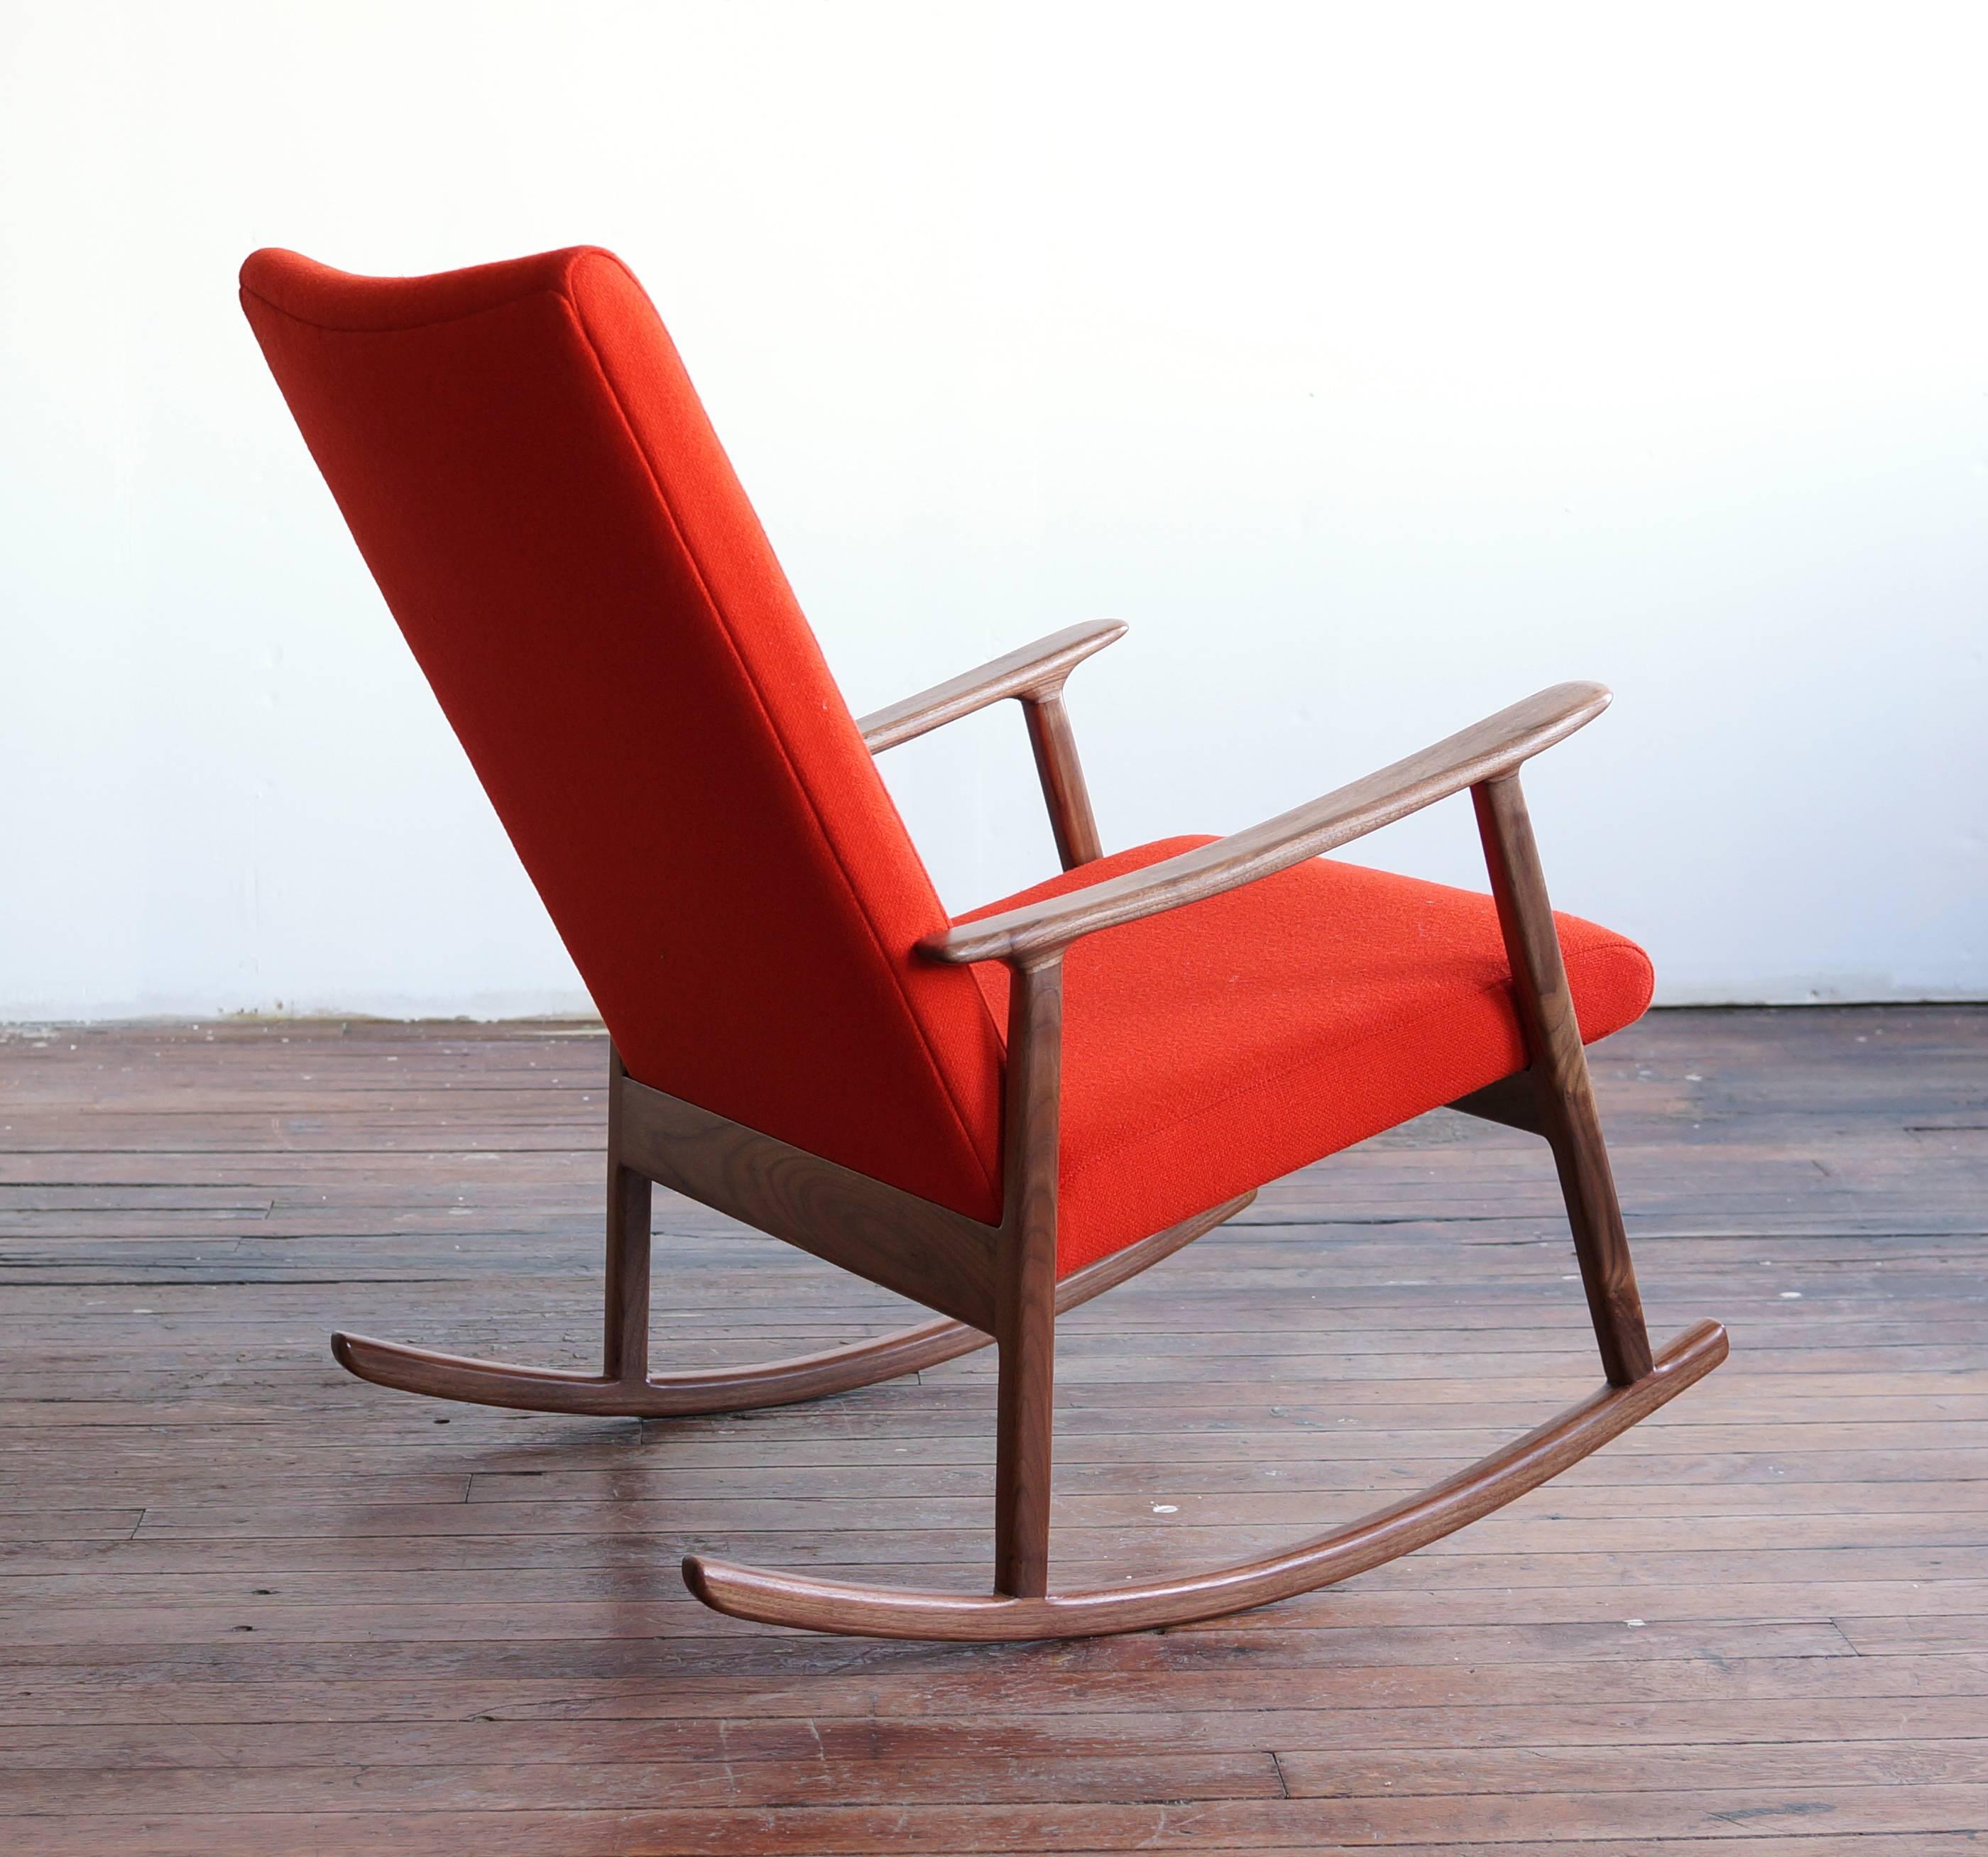 The RC01 is a contemporary handcrafted version of a classic midcentury style, the upholstered rocker/lounge with solid wood frame and armrests. What sets this chair apart are the quality and the details - the organic sculpted arms, the subtle curve